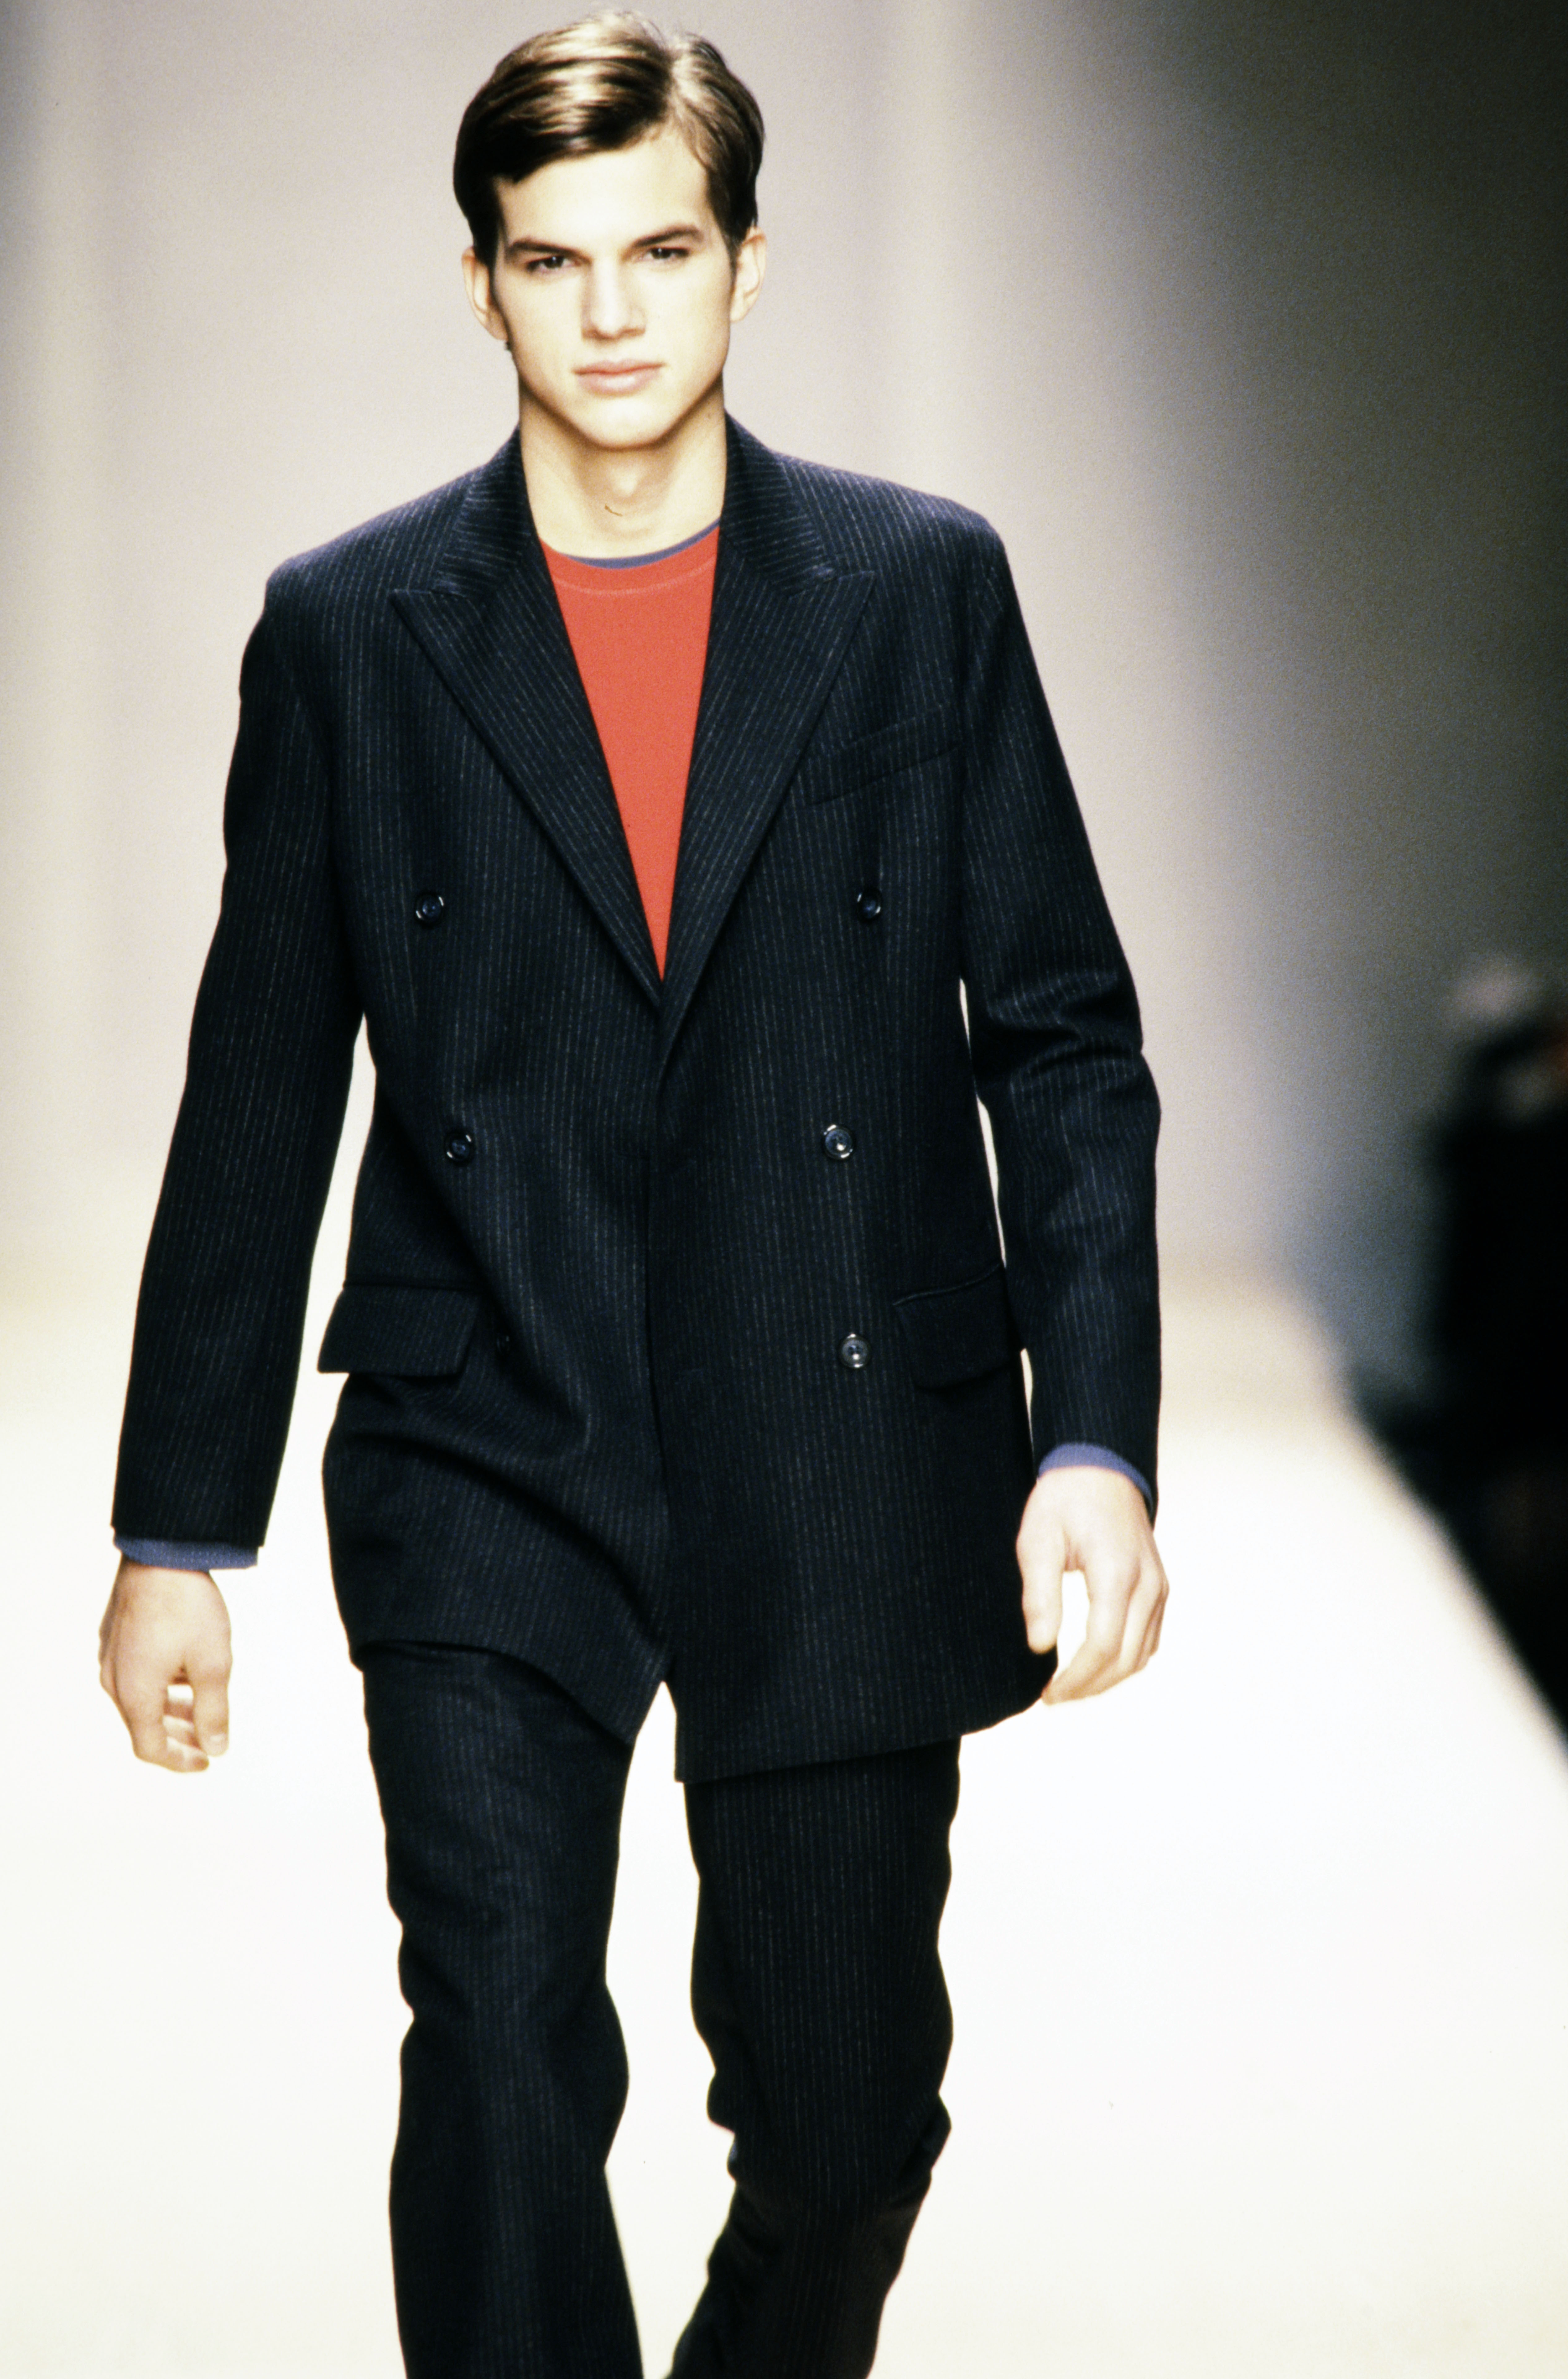 Ashton Kutcher walking in the Byblos Spring 1998 Men's Ready to Wear Collection Runway Show. | Source: Getty Images